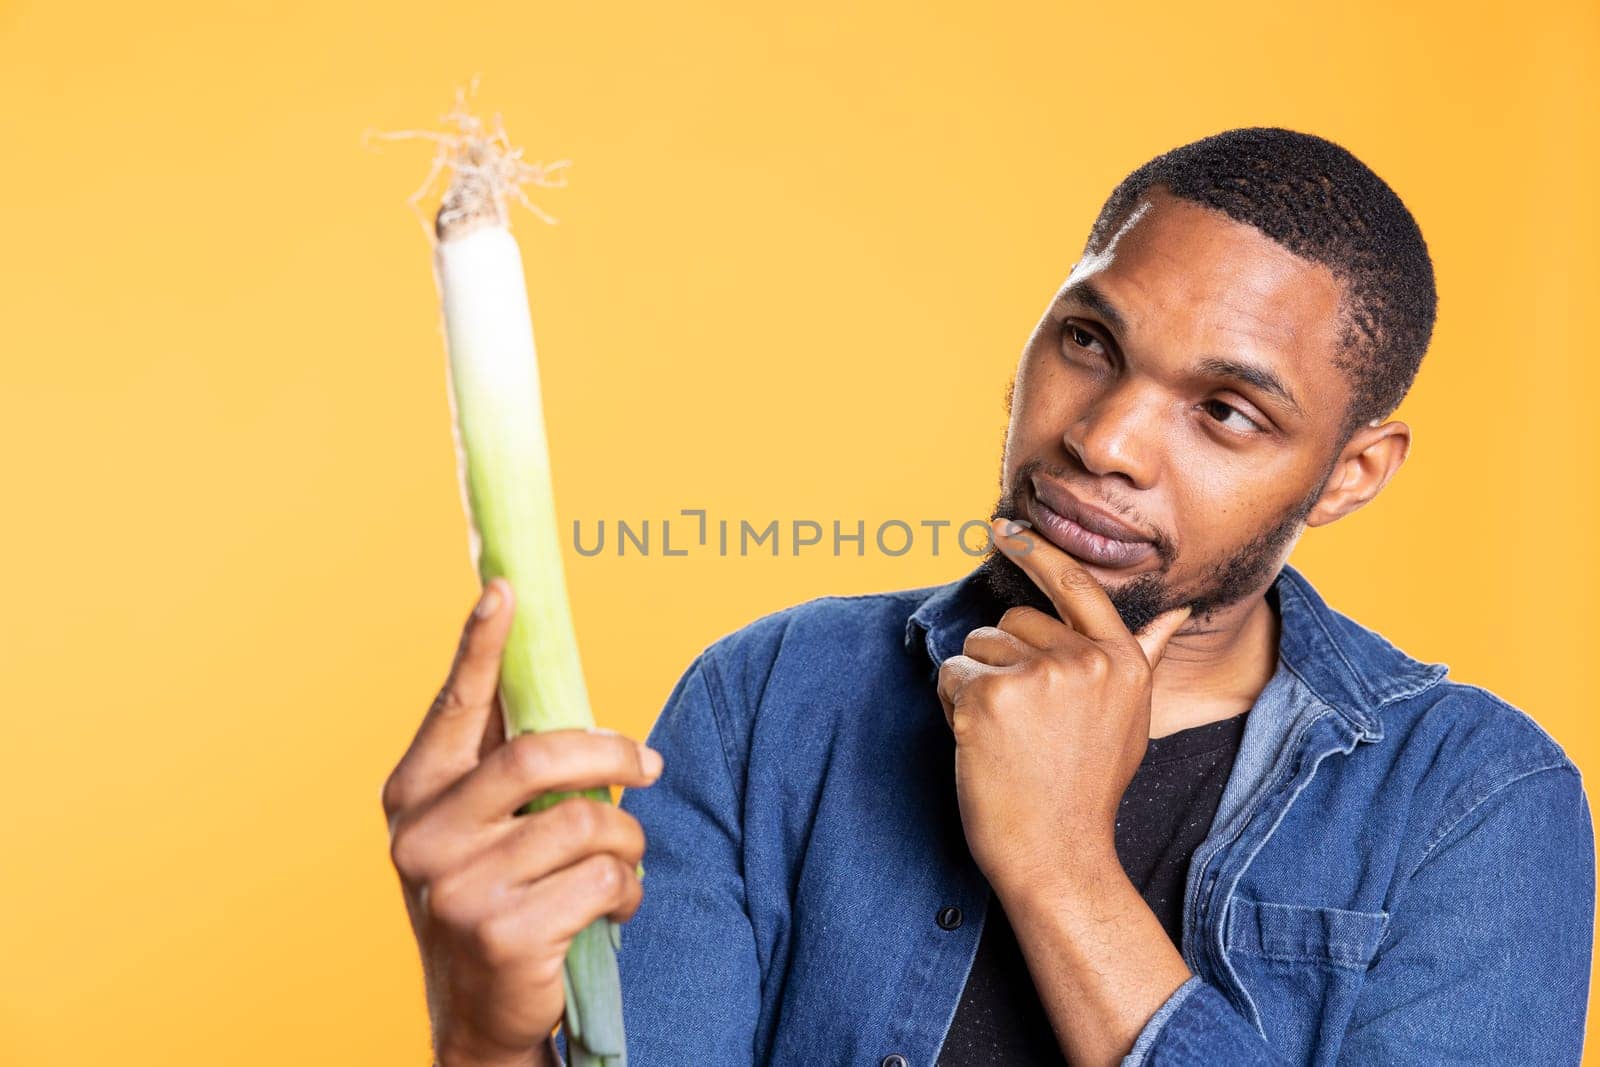 African american guy examines a locally grown leek plant against yellow background, doing a close inspection on green onion. Vegan person looking focused at organic food product.